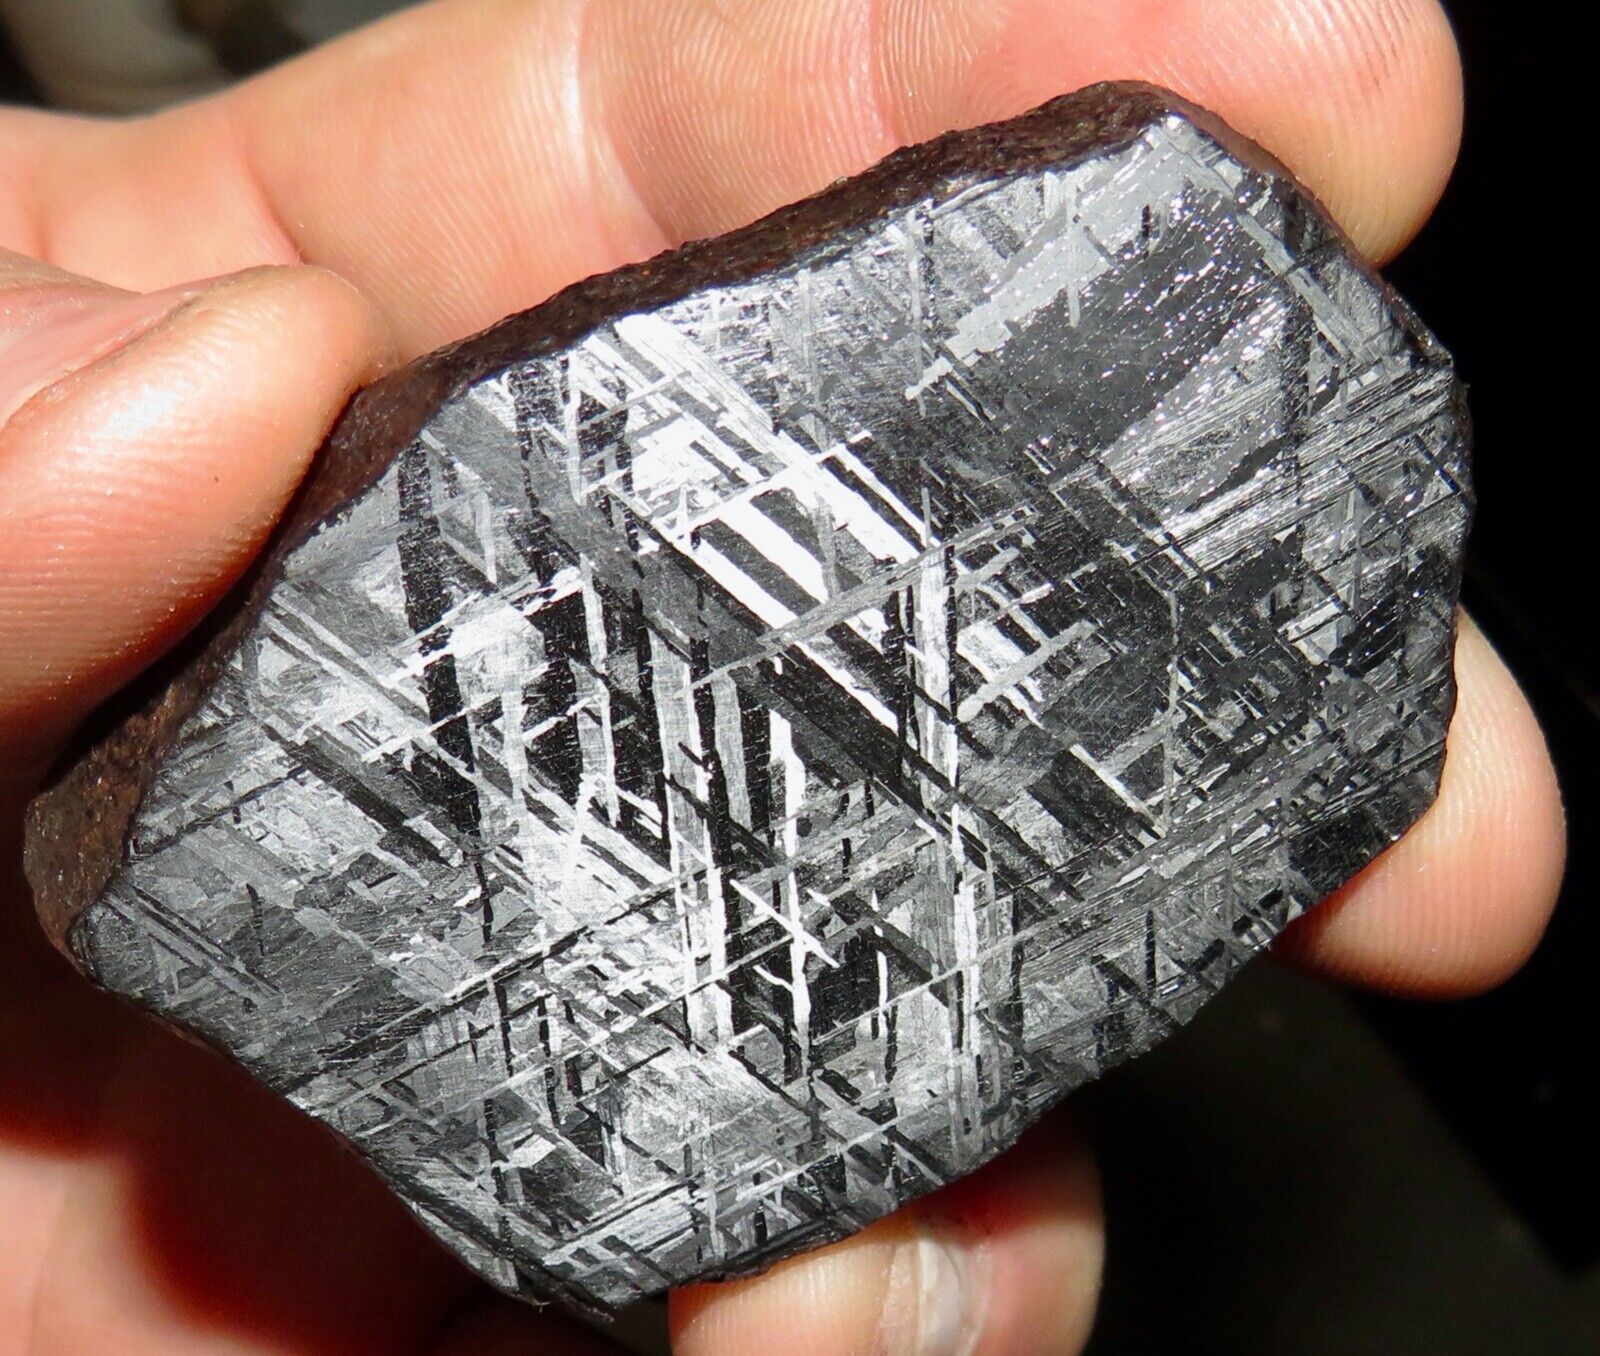 115 GM ETCHED GIBEON IRON METEORITE SLICE MUSEUM  GRADE   NAMIBIA AFRICA